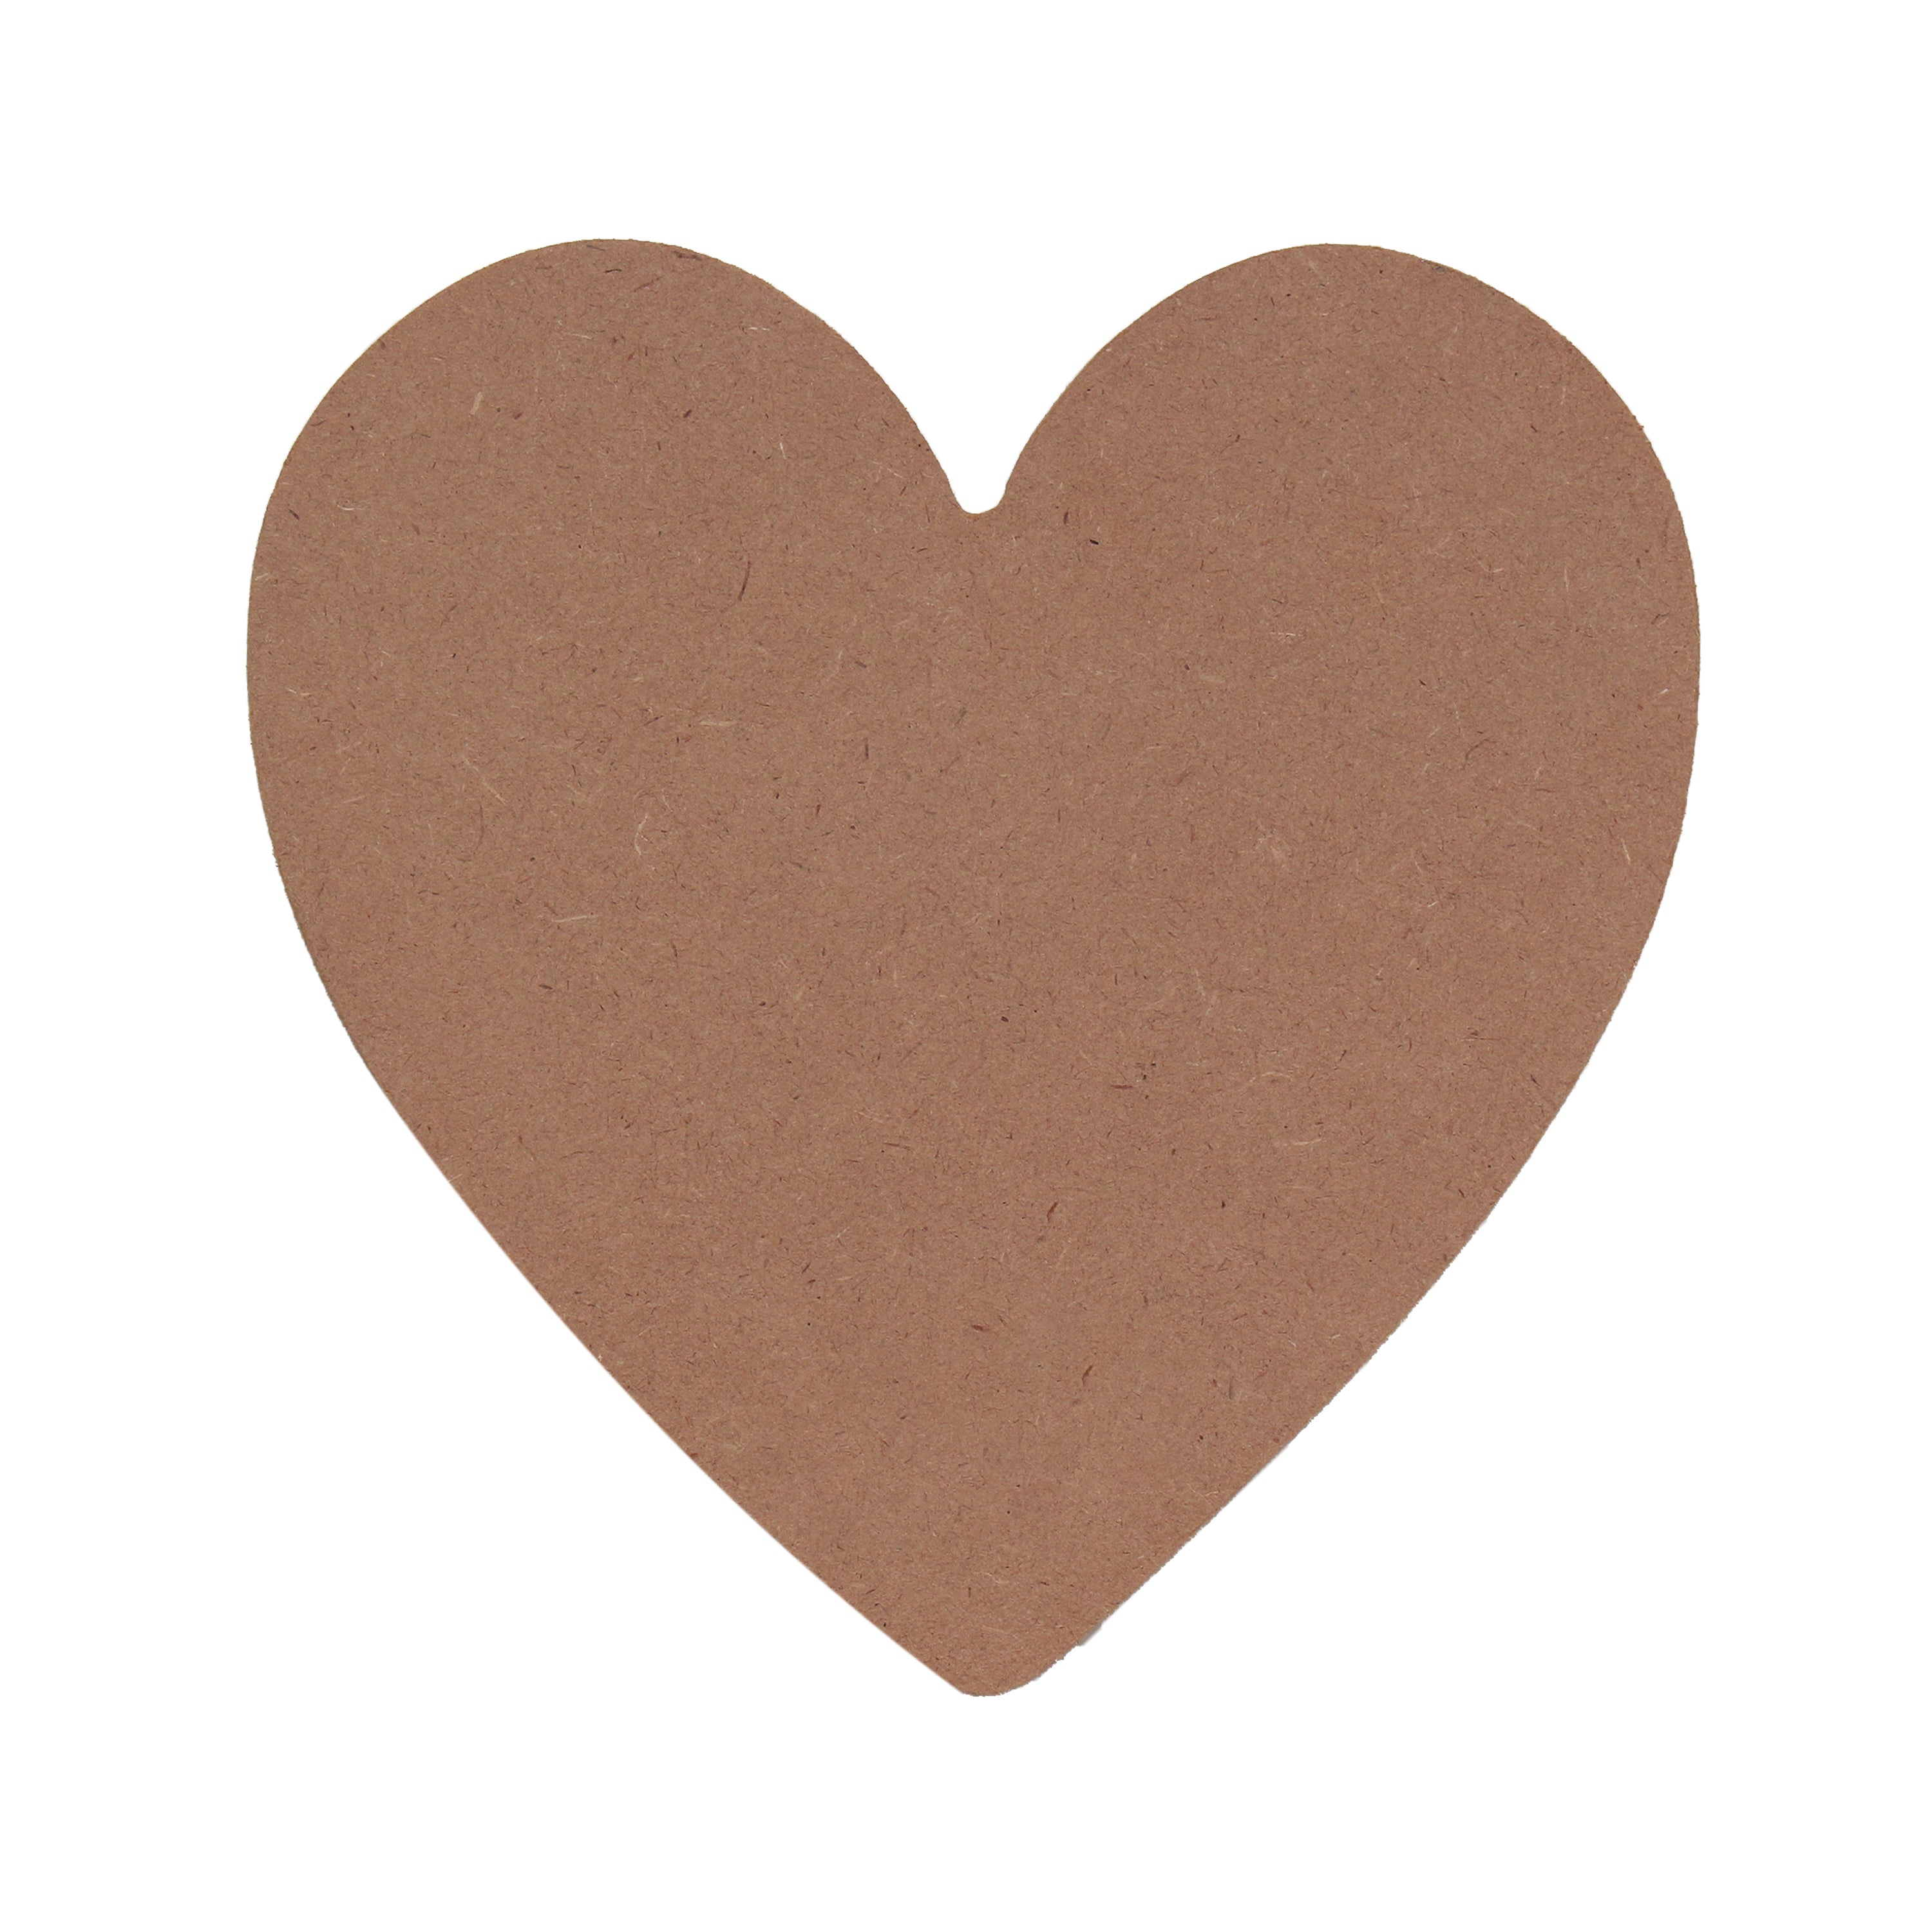 Mdf Blank Heart 8 X 8Inch 5.5Mm Thick 1Pc Lb